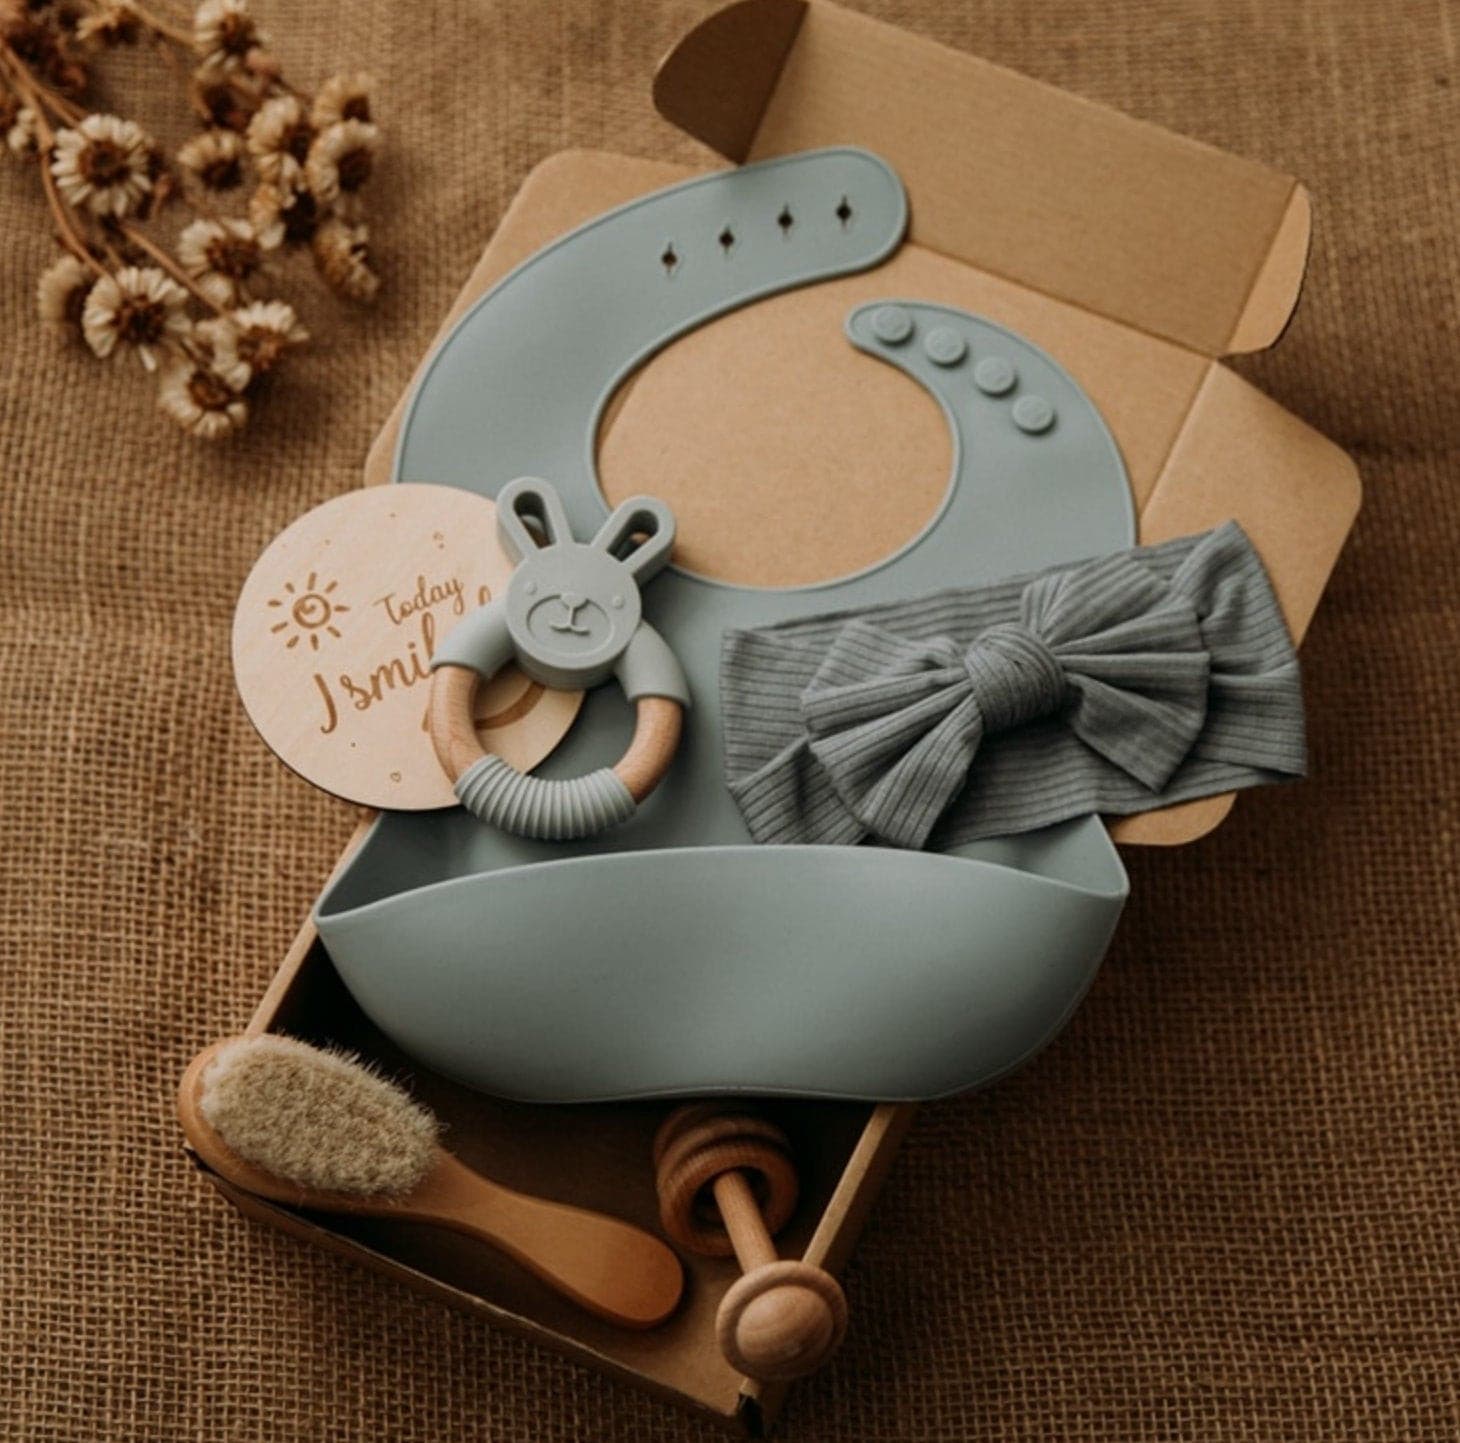 Newborn Baby Hamper  |  Silicone Gift Set | Baby Boy Hamper | Silicone-
 This handmade , adorable baby hamper has been carefully made and packaged with love for a very special baby girl / or boy.Product Info -This luxe hamper includes:--Bijou Bubs